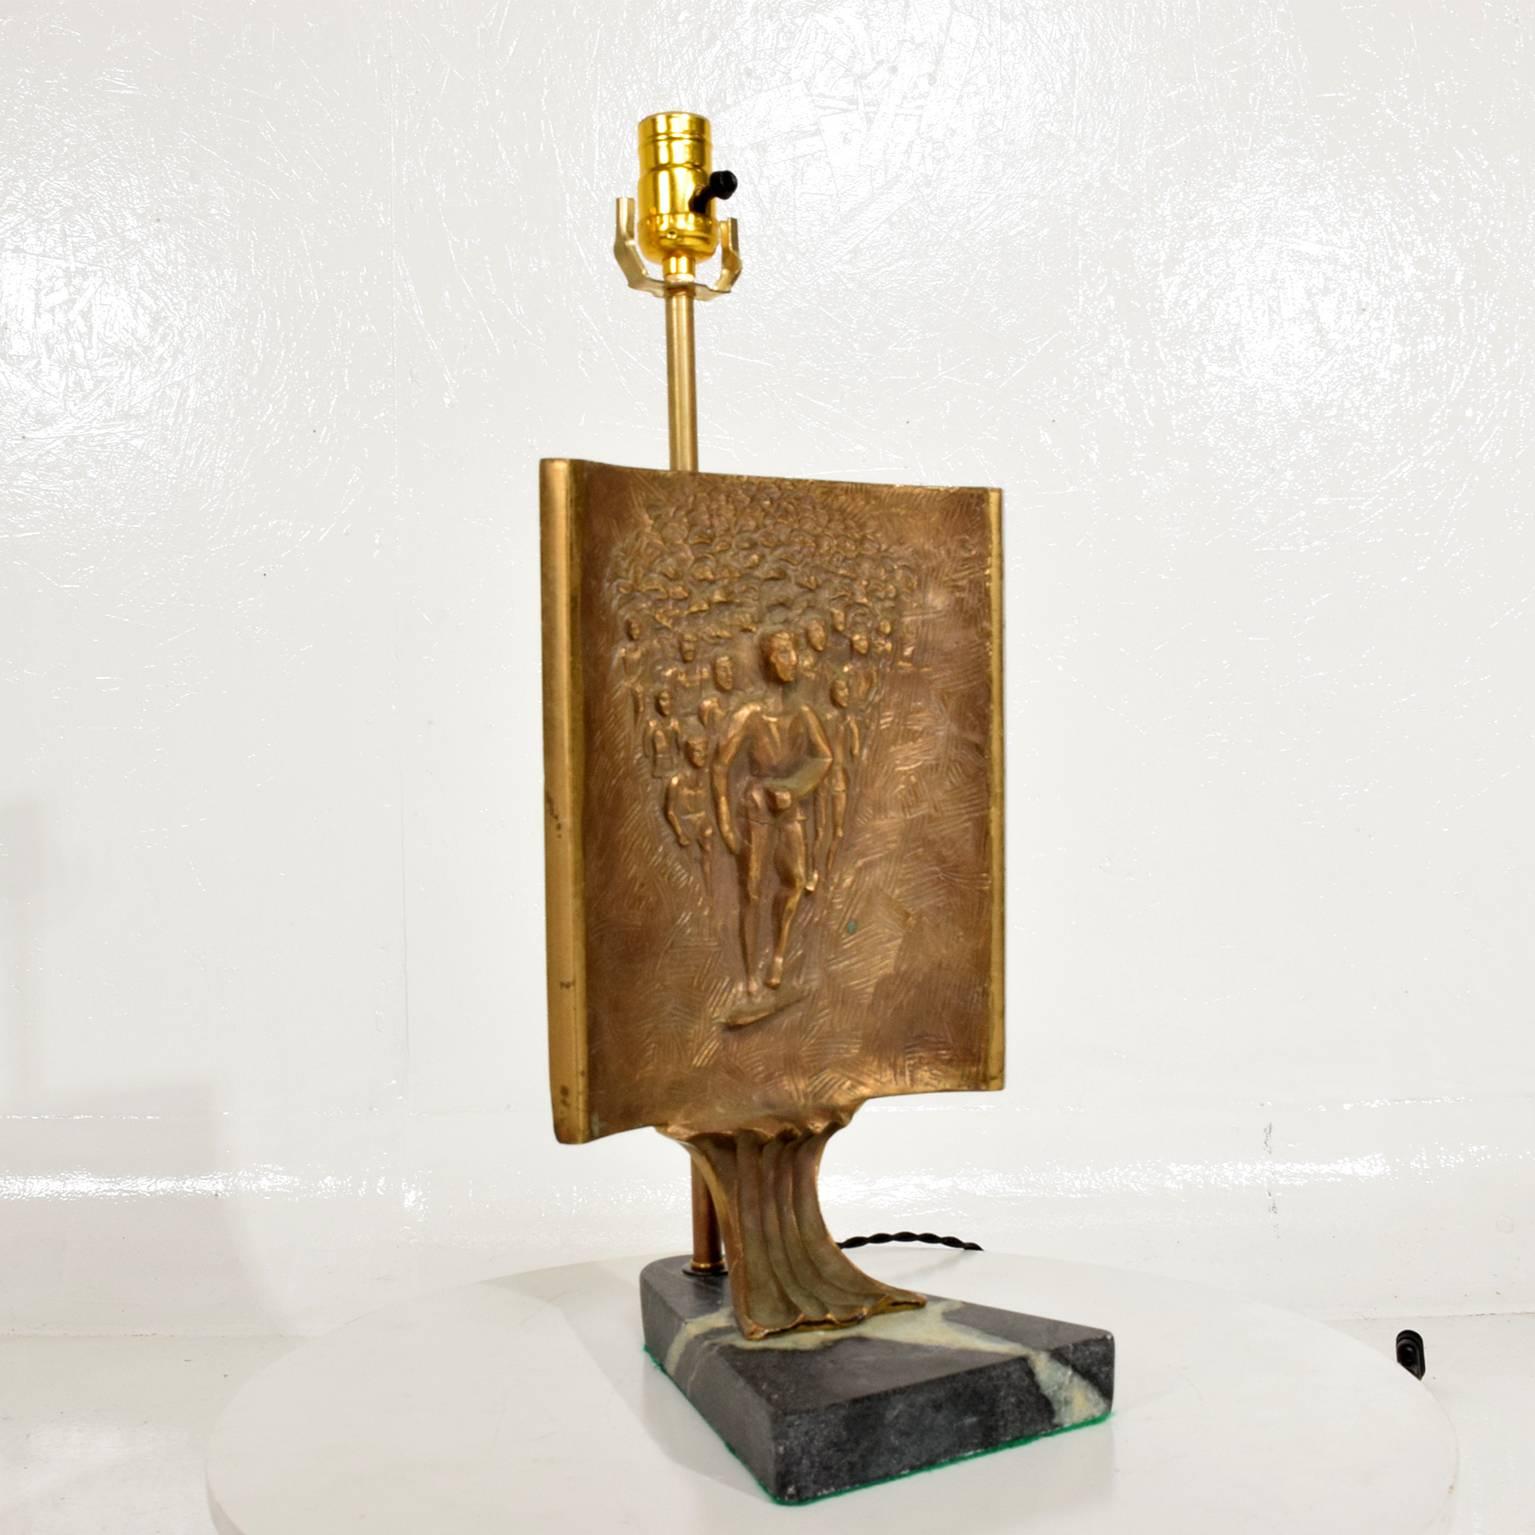 For your consideration, Mid-Century Modern table lamp with Italia bronze Brutalist sculpture.
The new base in green marble gives a great contrast to the patinated bronze sculpture. 
Sculpture comes from Italy, circa 1950s.
Rewired, no shade